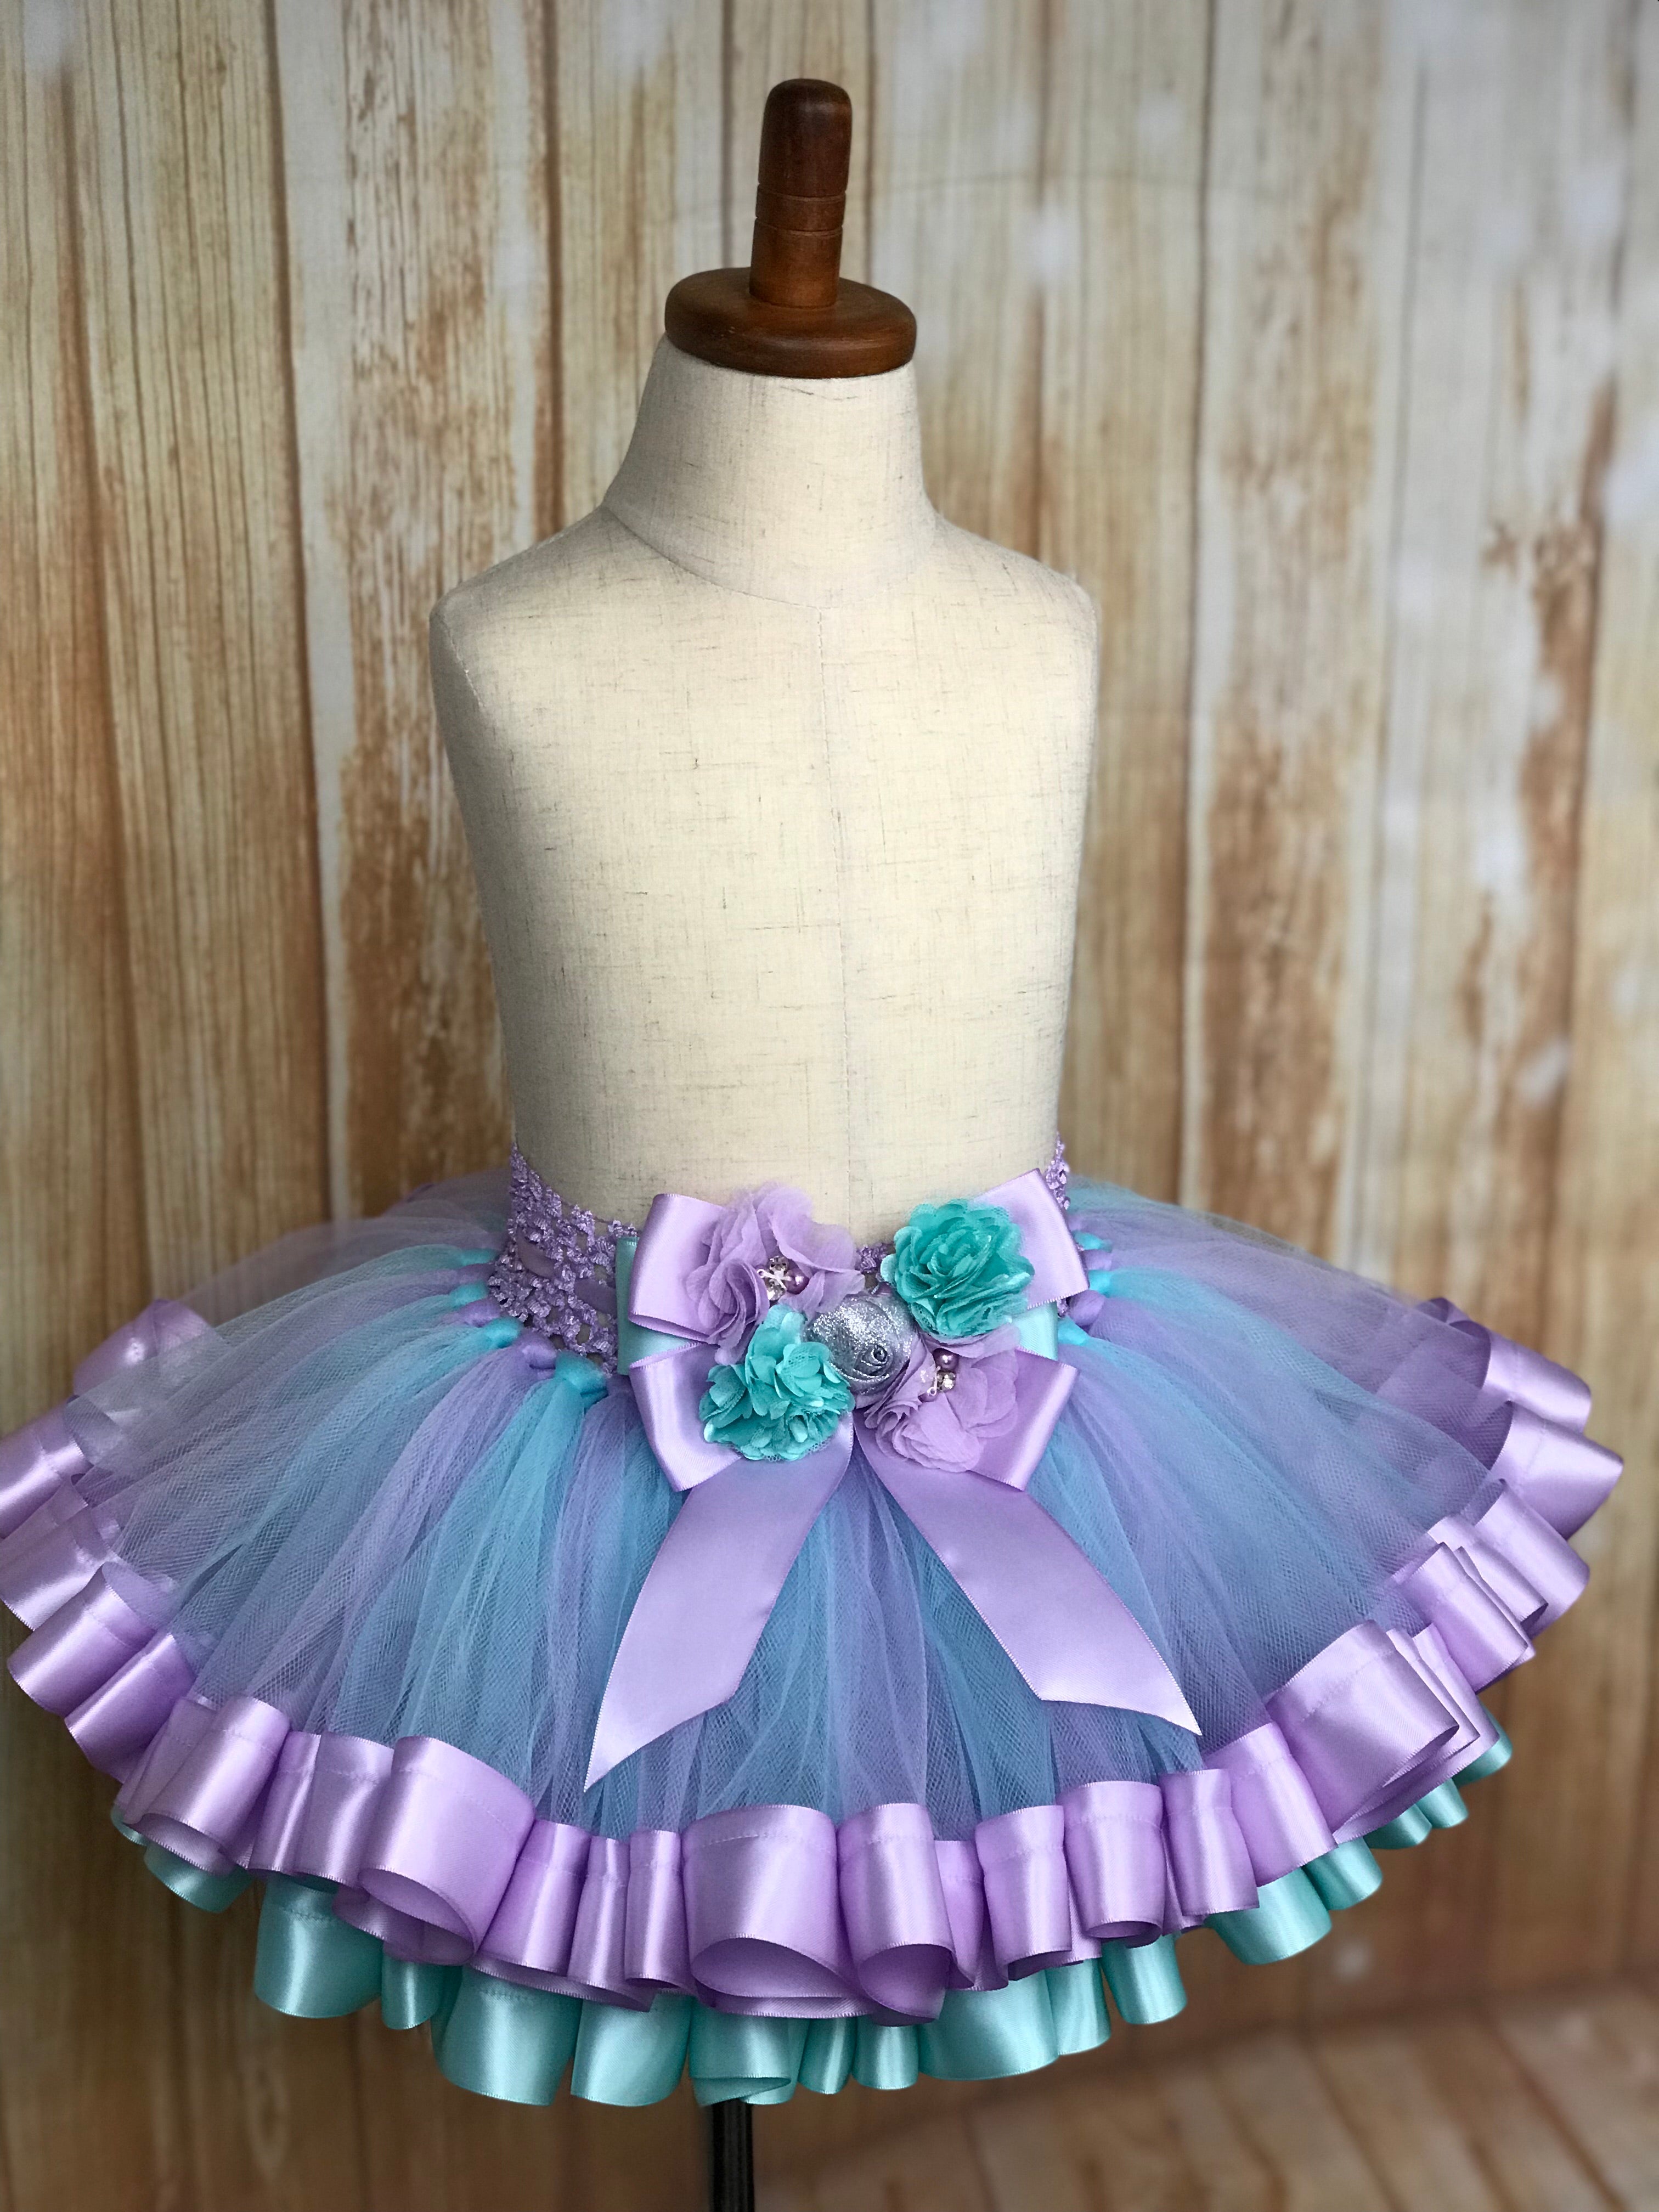 Ribbon Trimmed Tulle Tutu Skirt, customized in any color choice